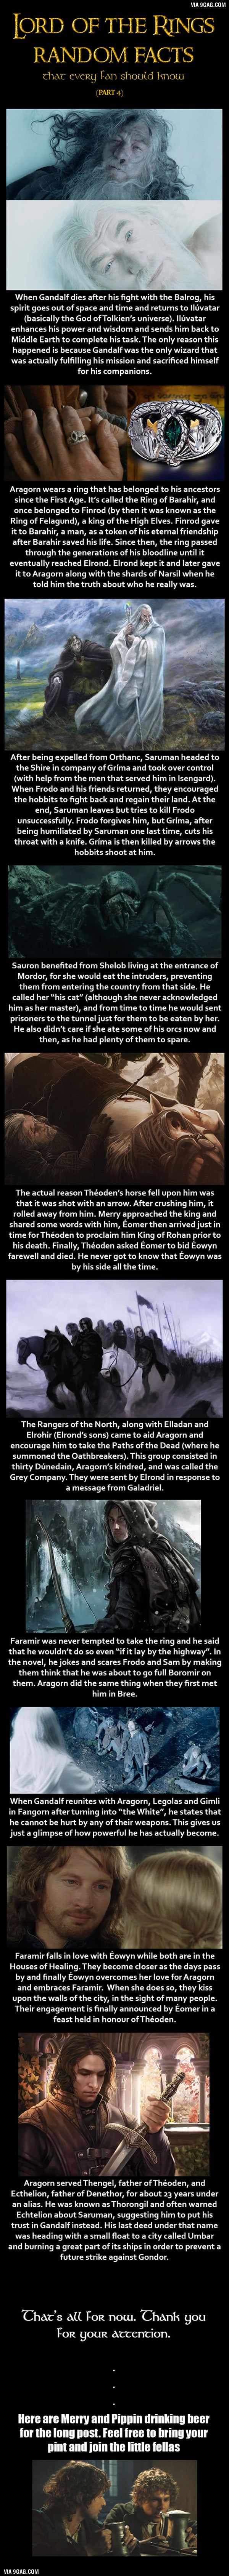 Lord of the Rings Random Facts Part 4